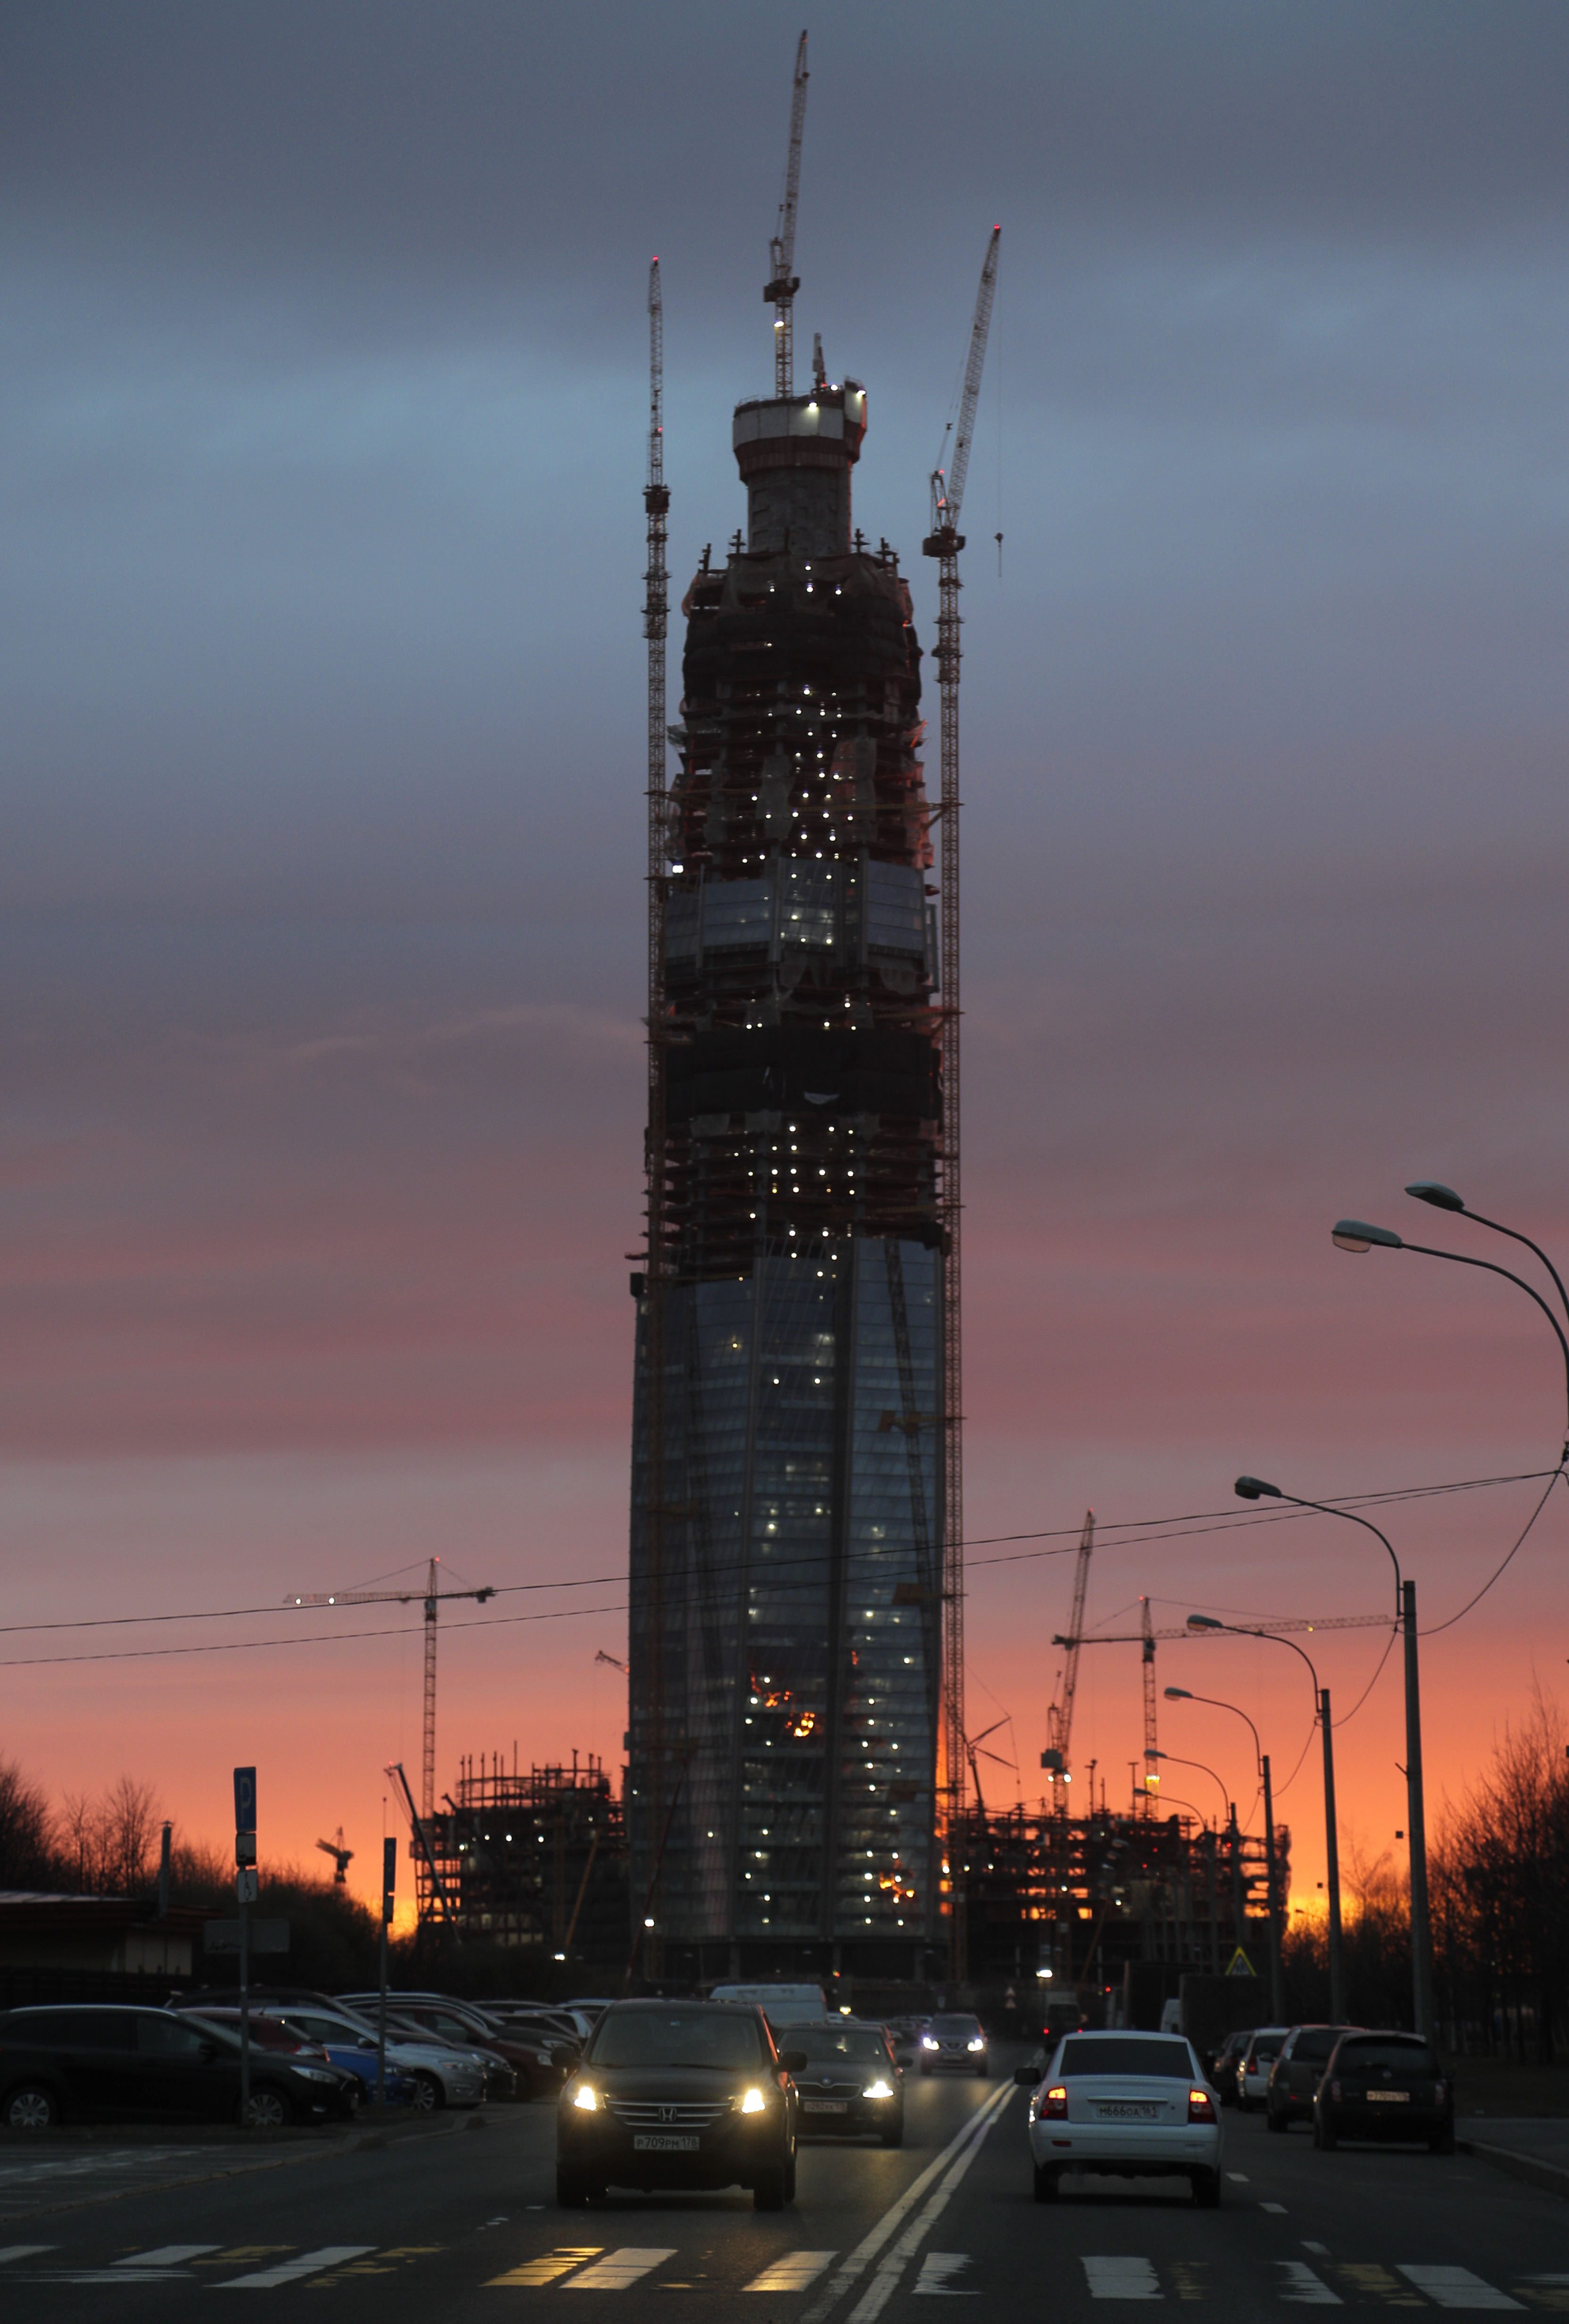 The 87 floor headquarters building of Russian gas company Gazprom under construction seen at sunset in St. Petersburg, Russia, Sunday, April 30, 2017. (AP Photo/Dmitri Lovetsky)